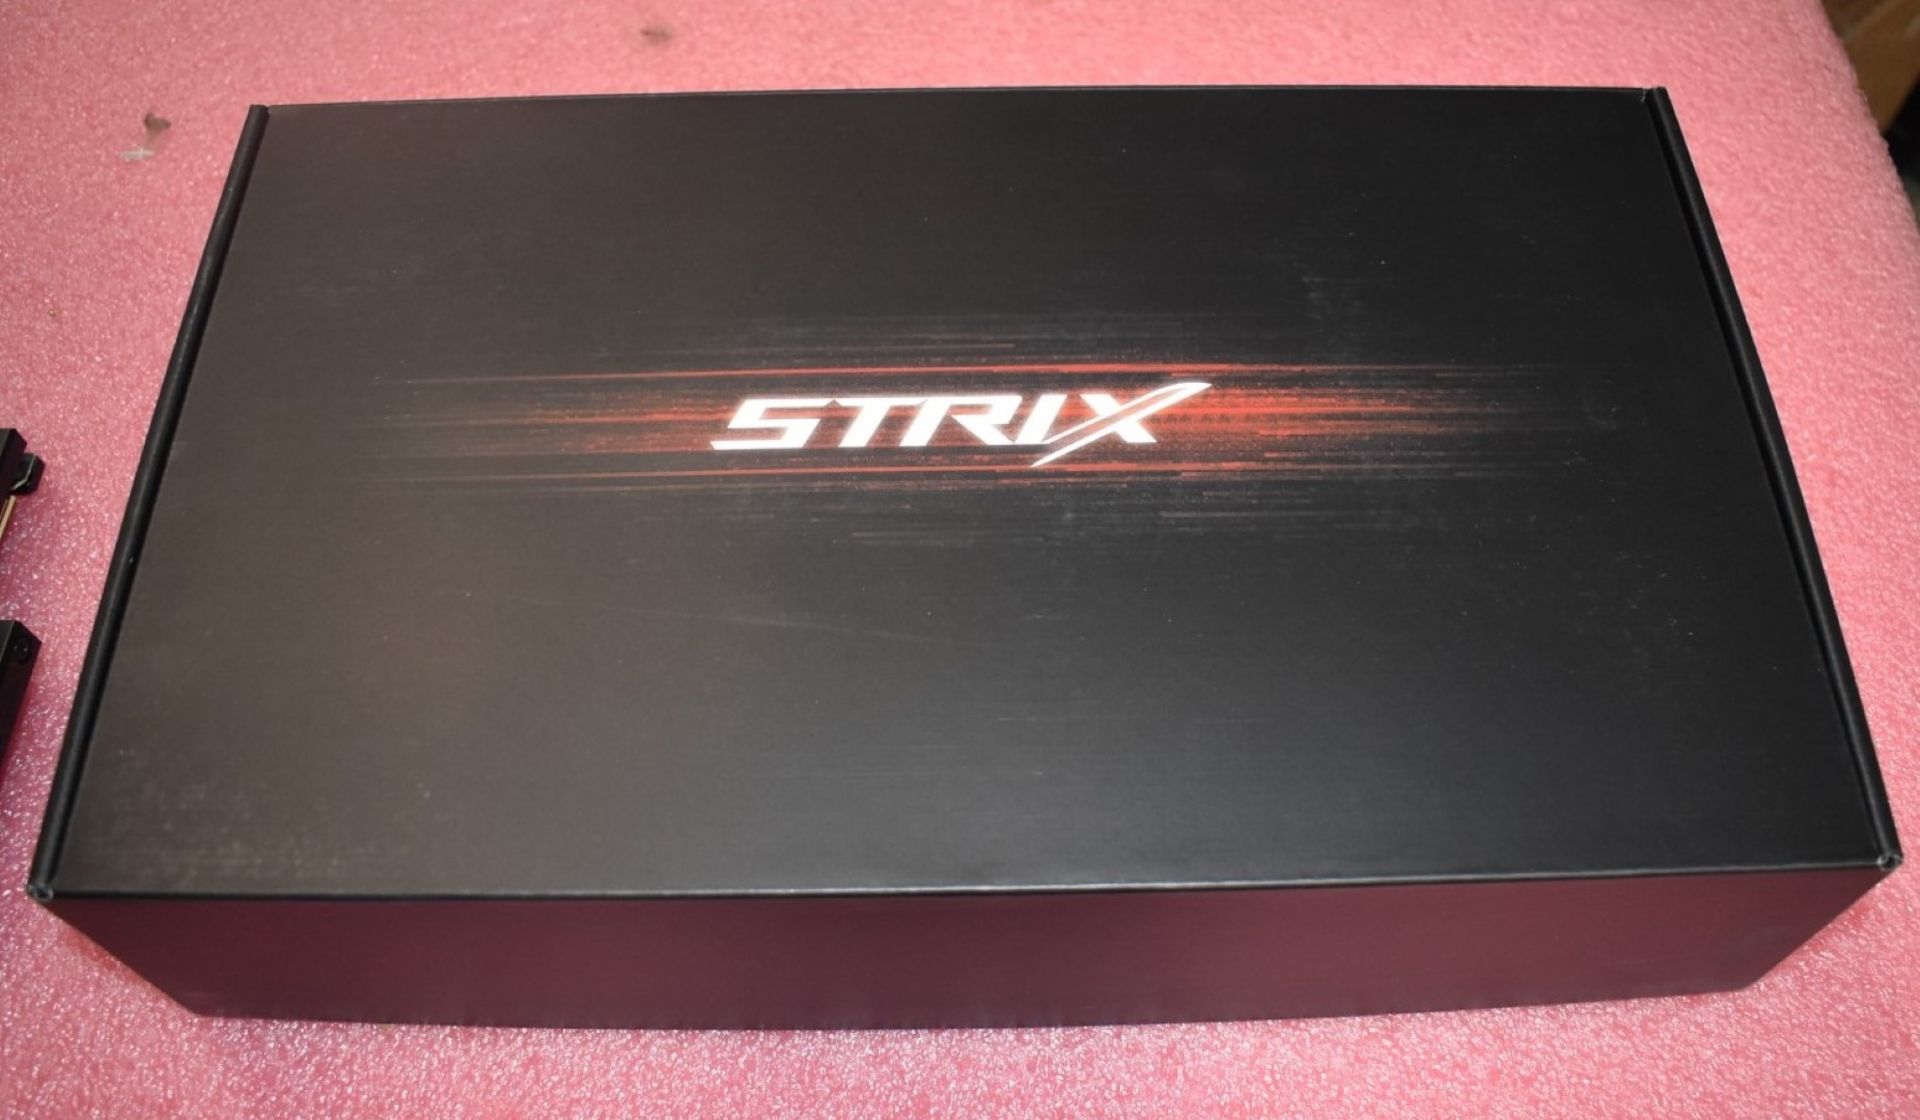 1 x Asus ROG Strix RTX3090 24gb Gaming Graphics Card With a Vector Strix Water Cooling Block - Image 12 of 16